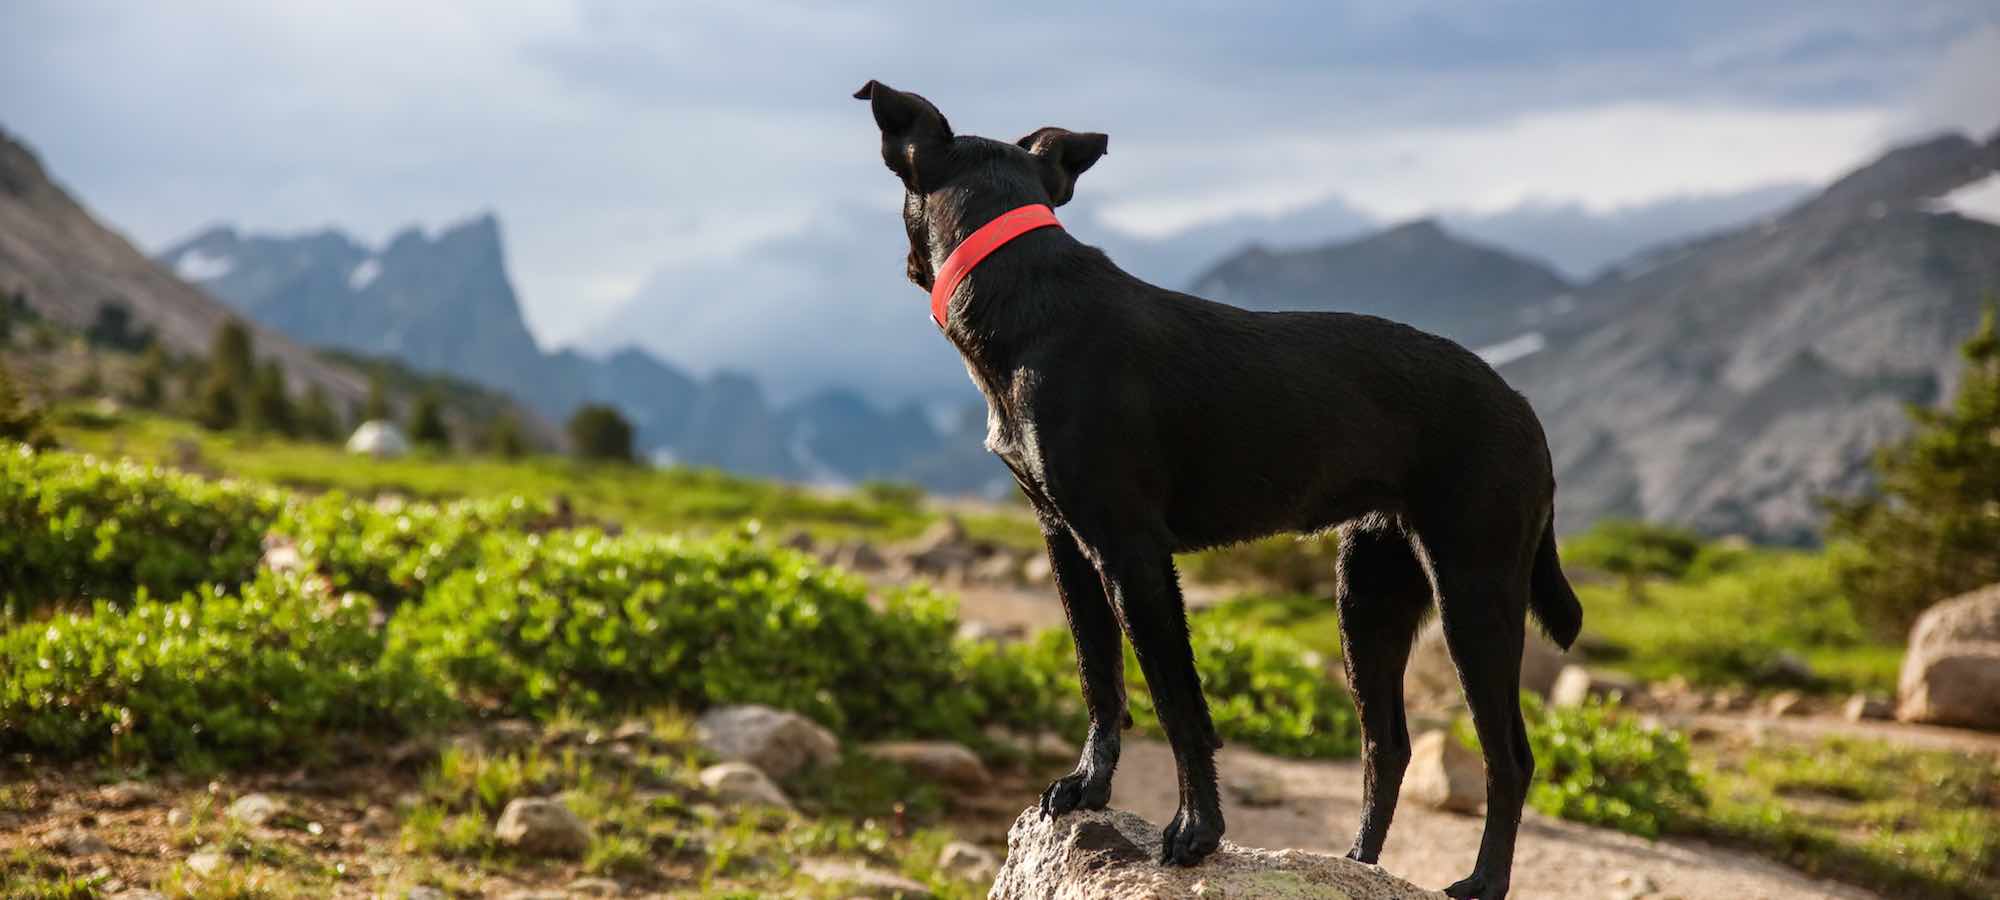 Black dog with red collar outside in mountains